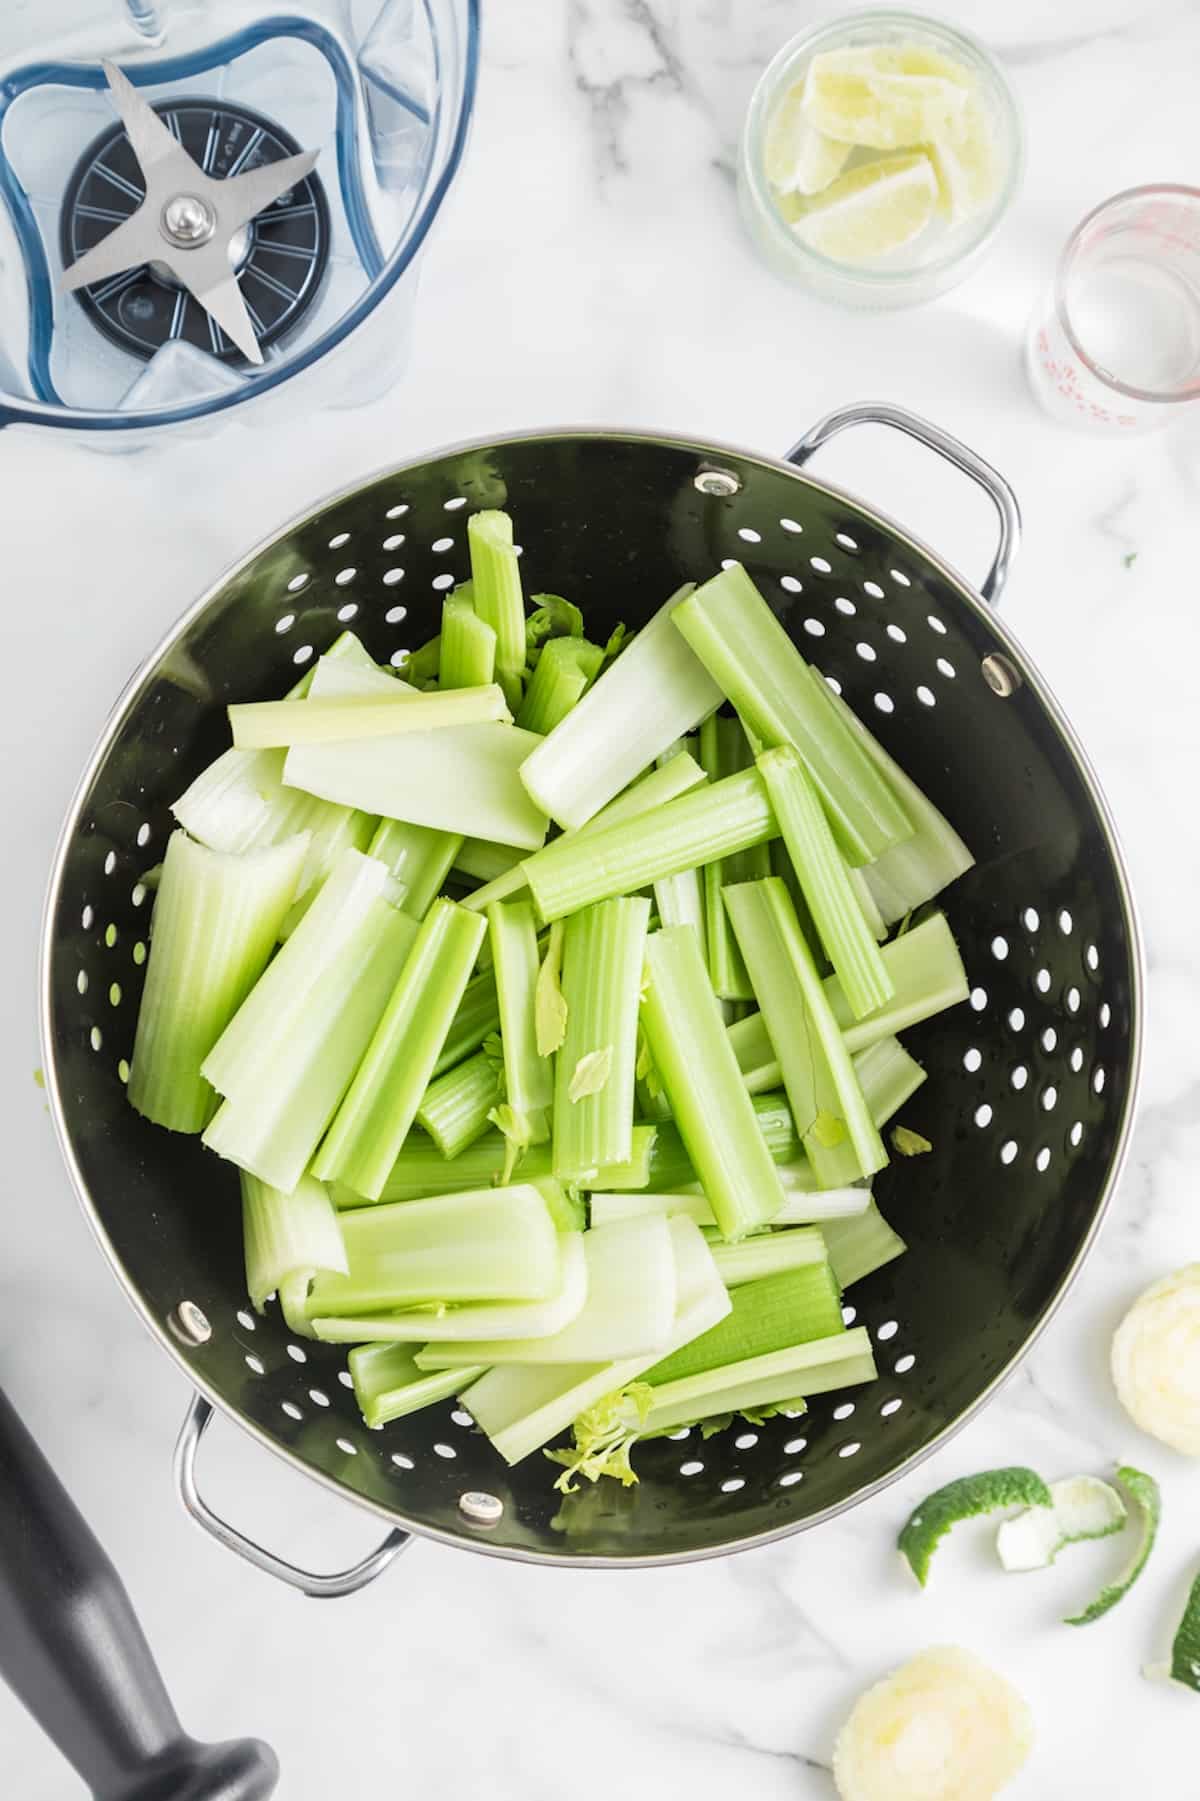 ingredients for making celery juice in a colander ready to juice.